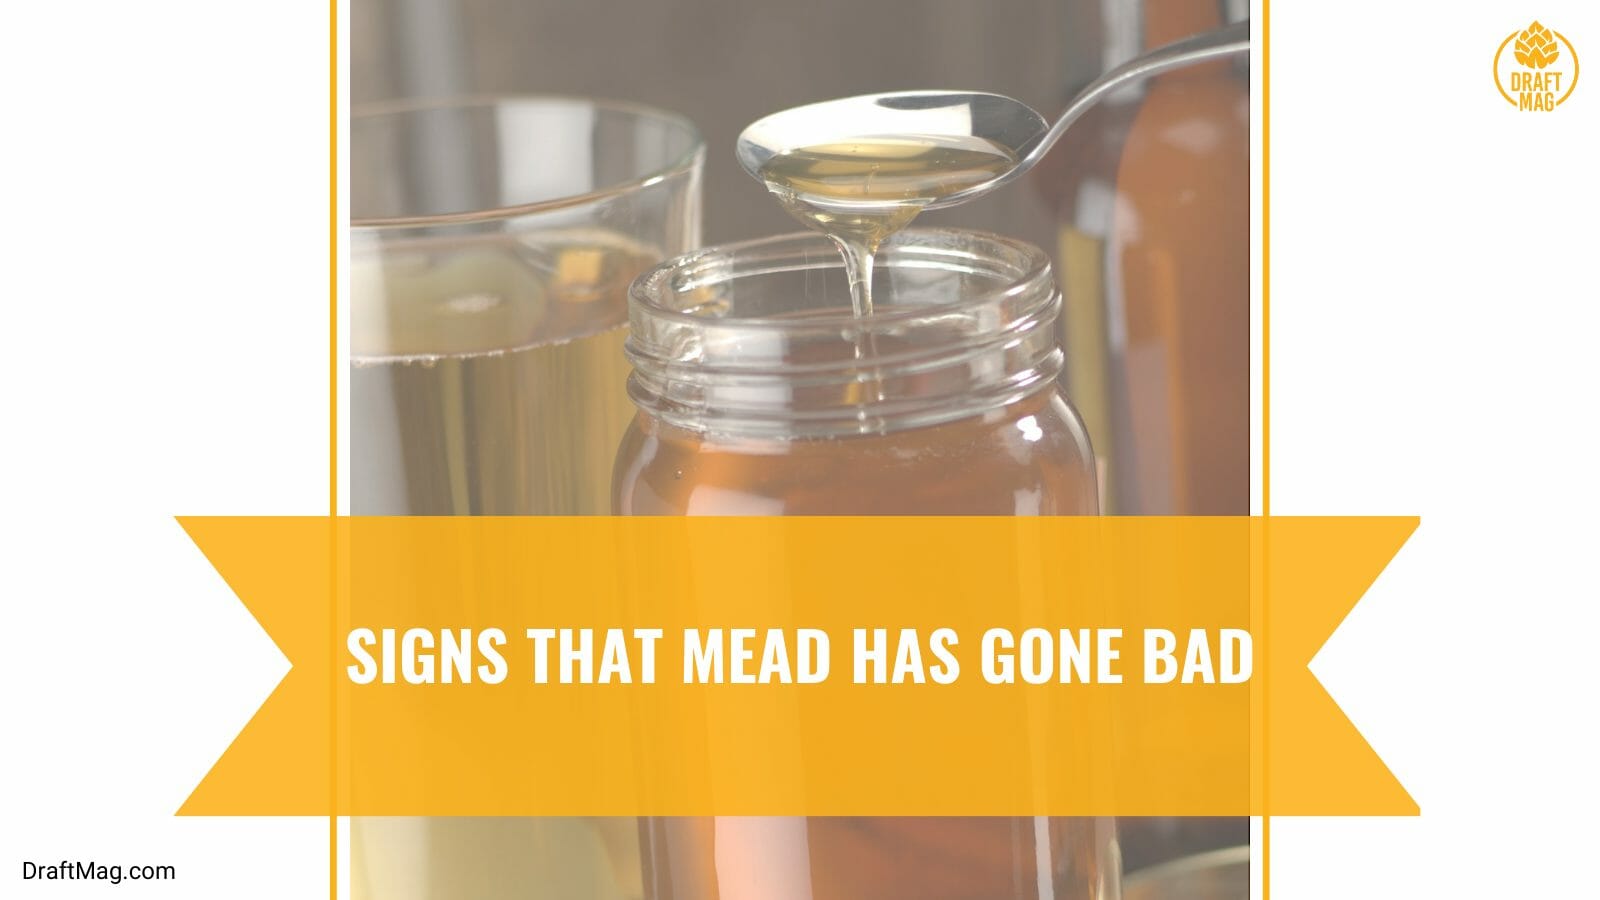 Signs of Bad Mead